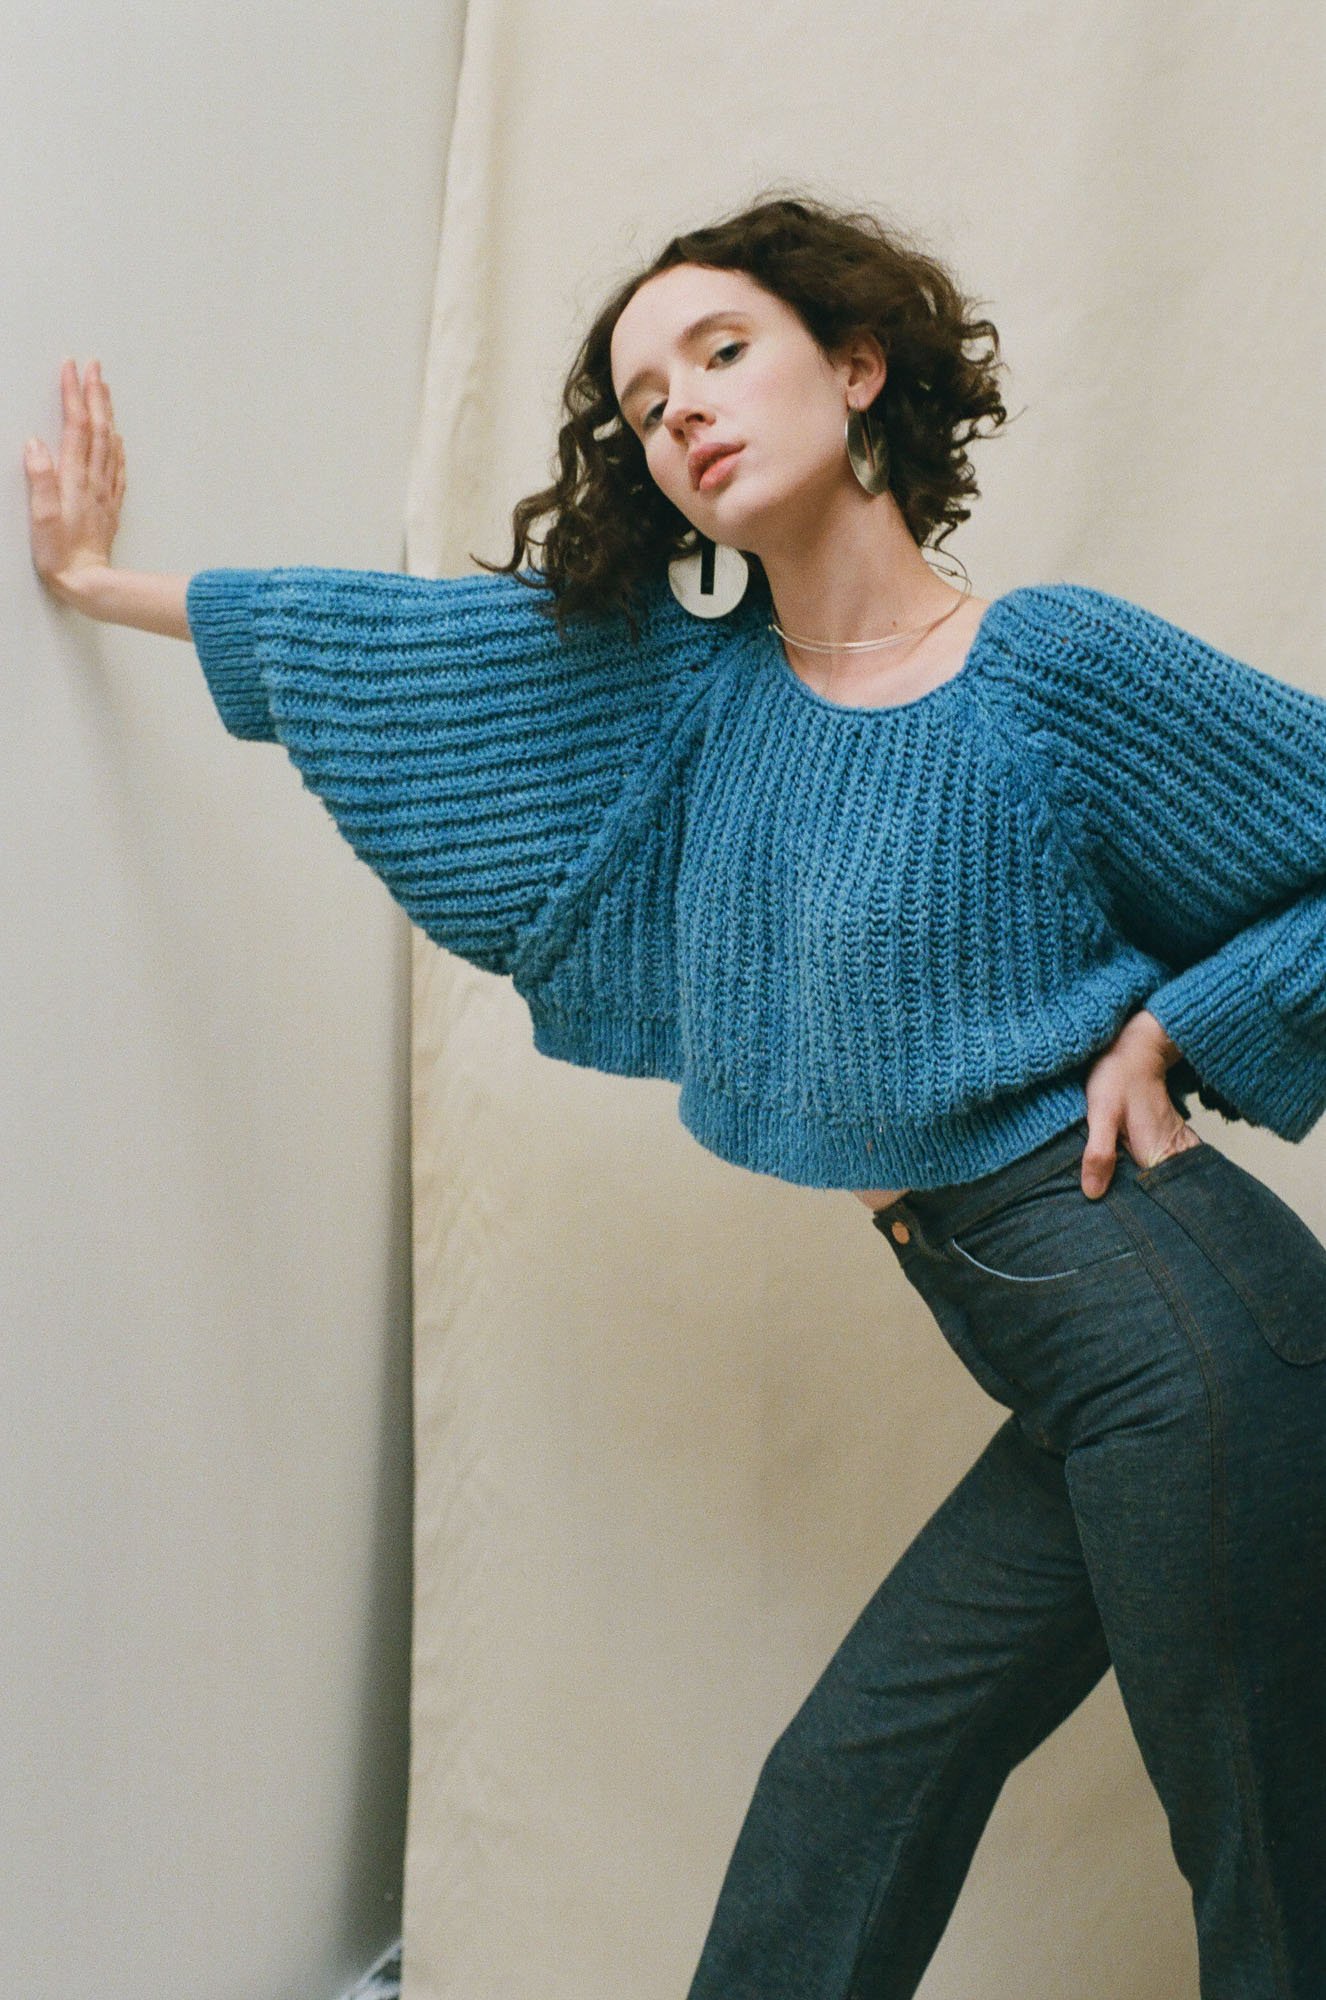  Expert Wardrobe Consultancy by Charlotte Sims —&nbsp;A woman in a blue sweater leaning against a wall. 